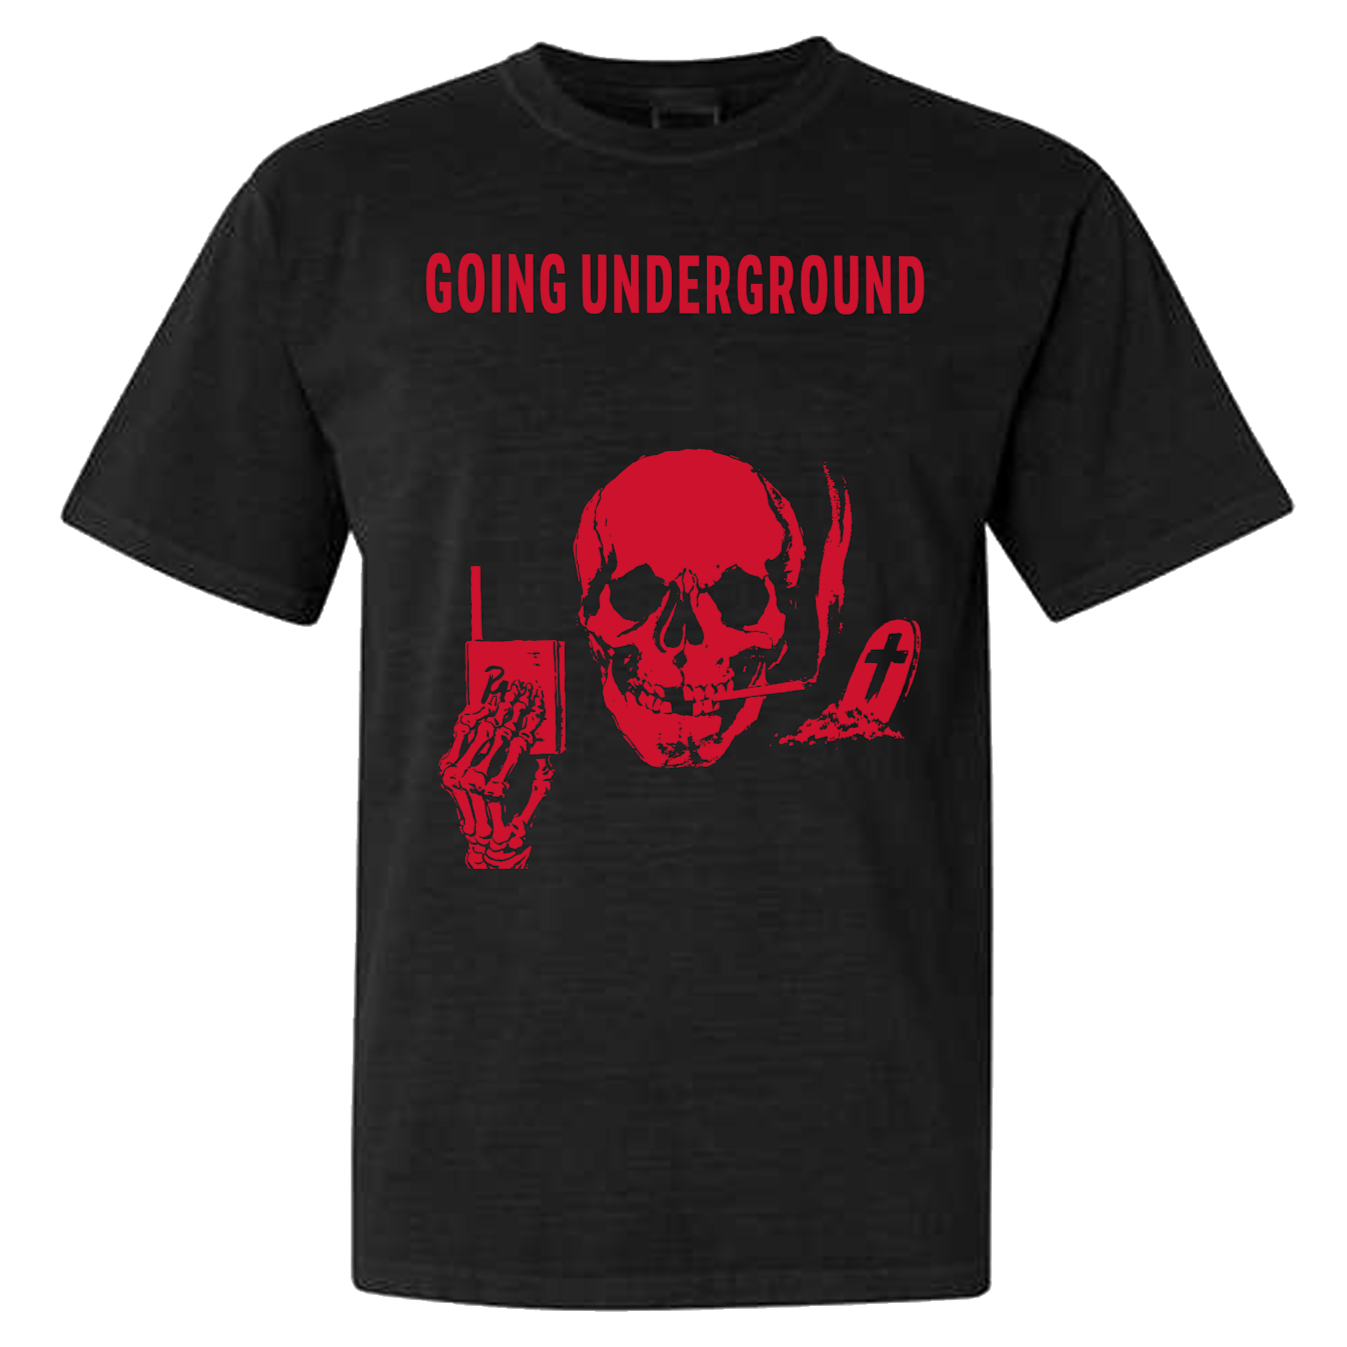 GOING UNDERGROUND - HAVE ANOTHER Shirt